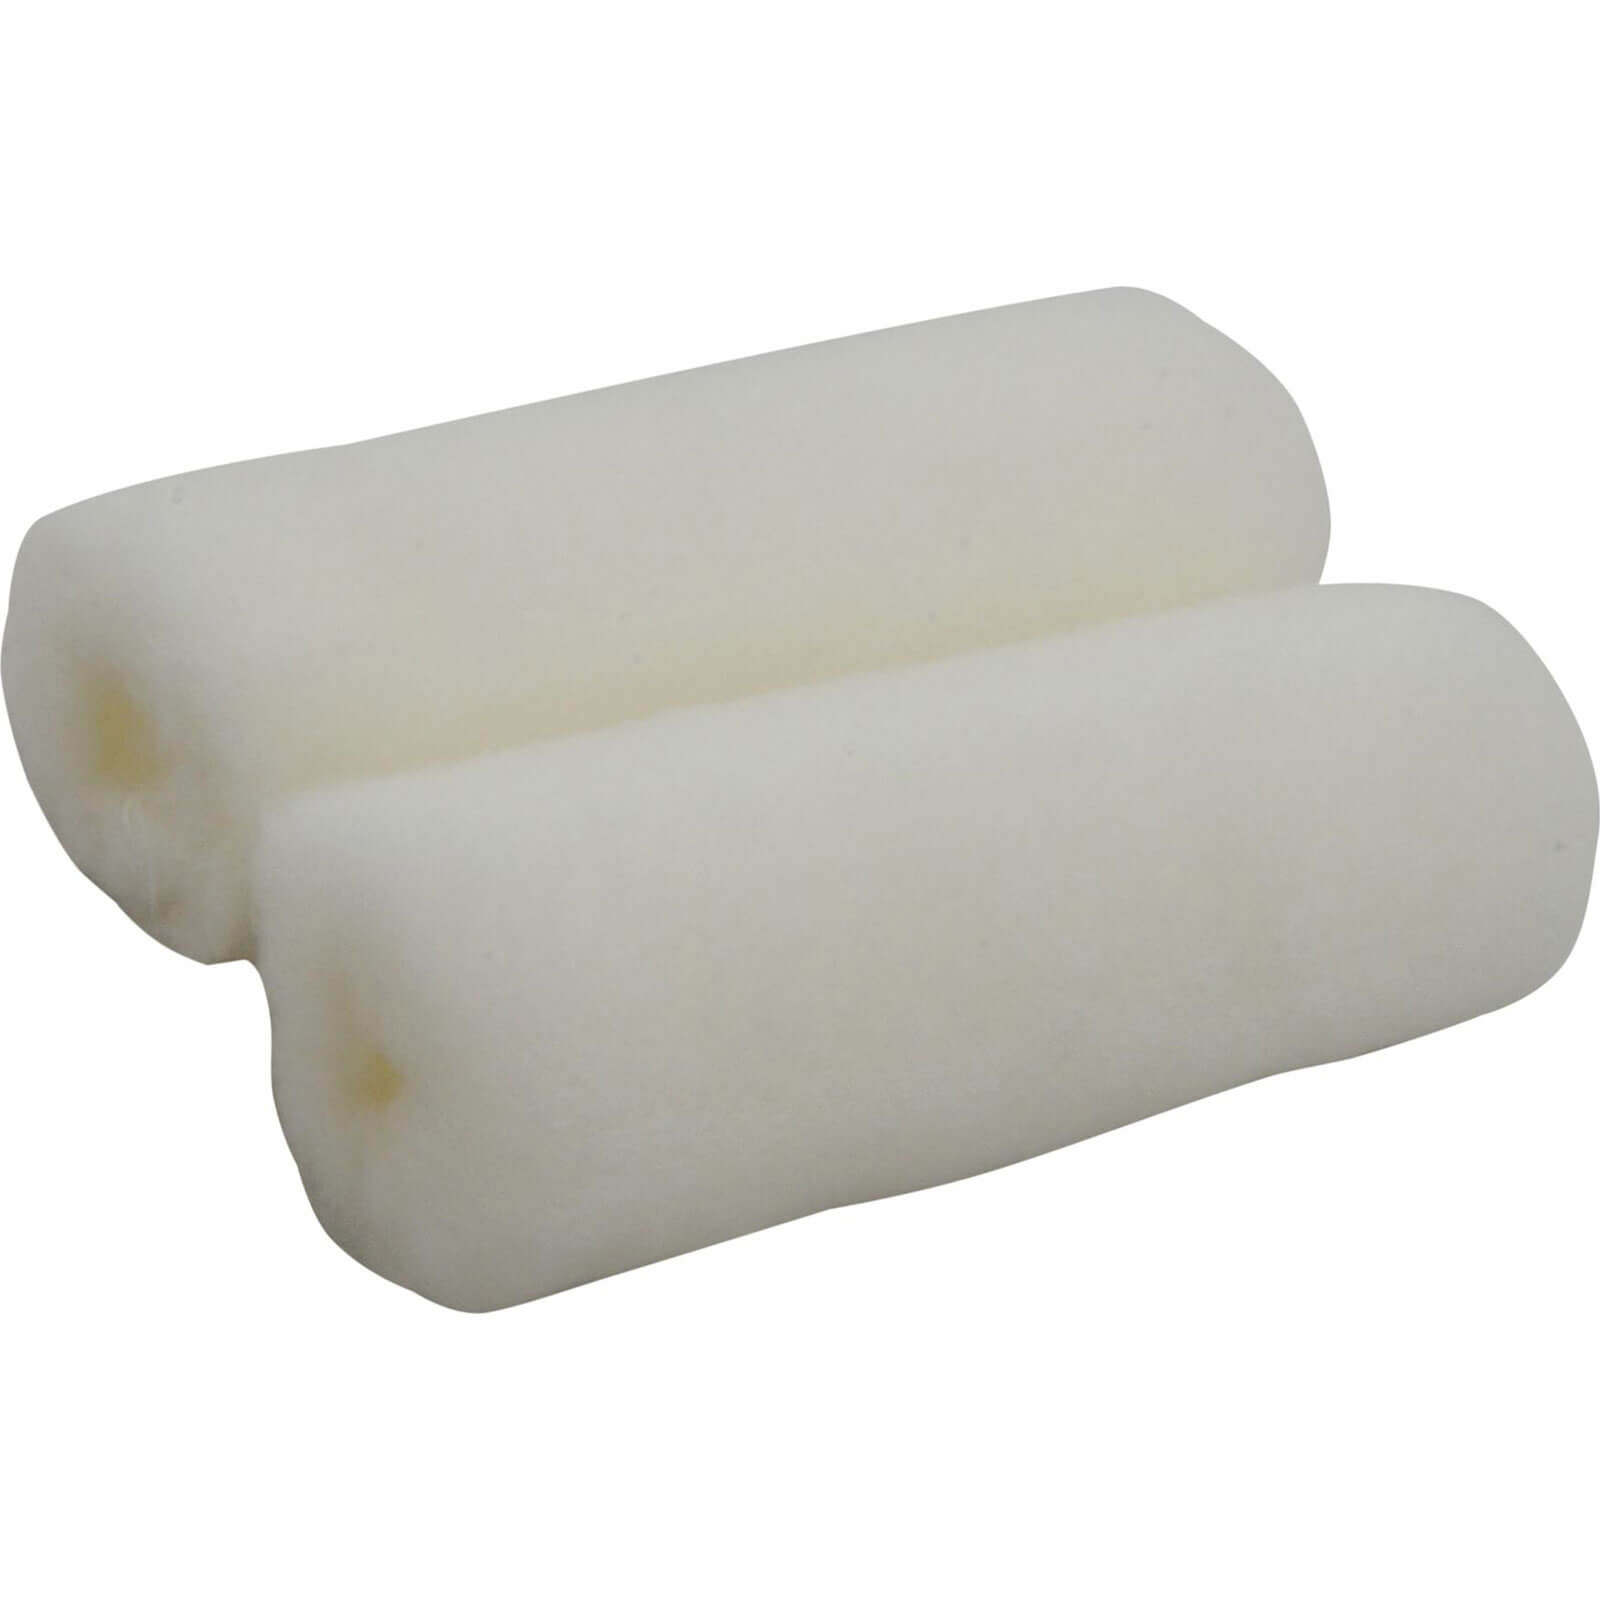 Image of Purdy Jumbo Mini White Dove Paint Roller Sleeve 19mm 114mm Pack of 2